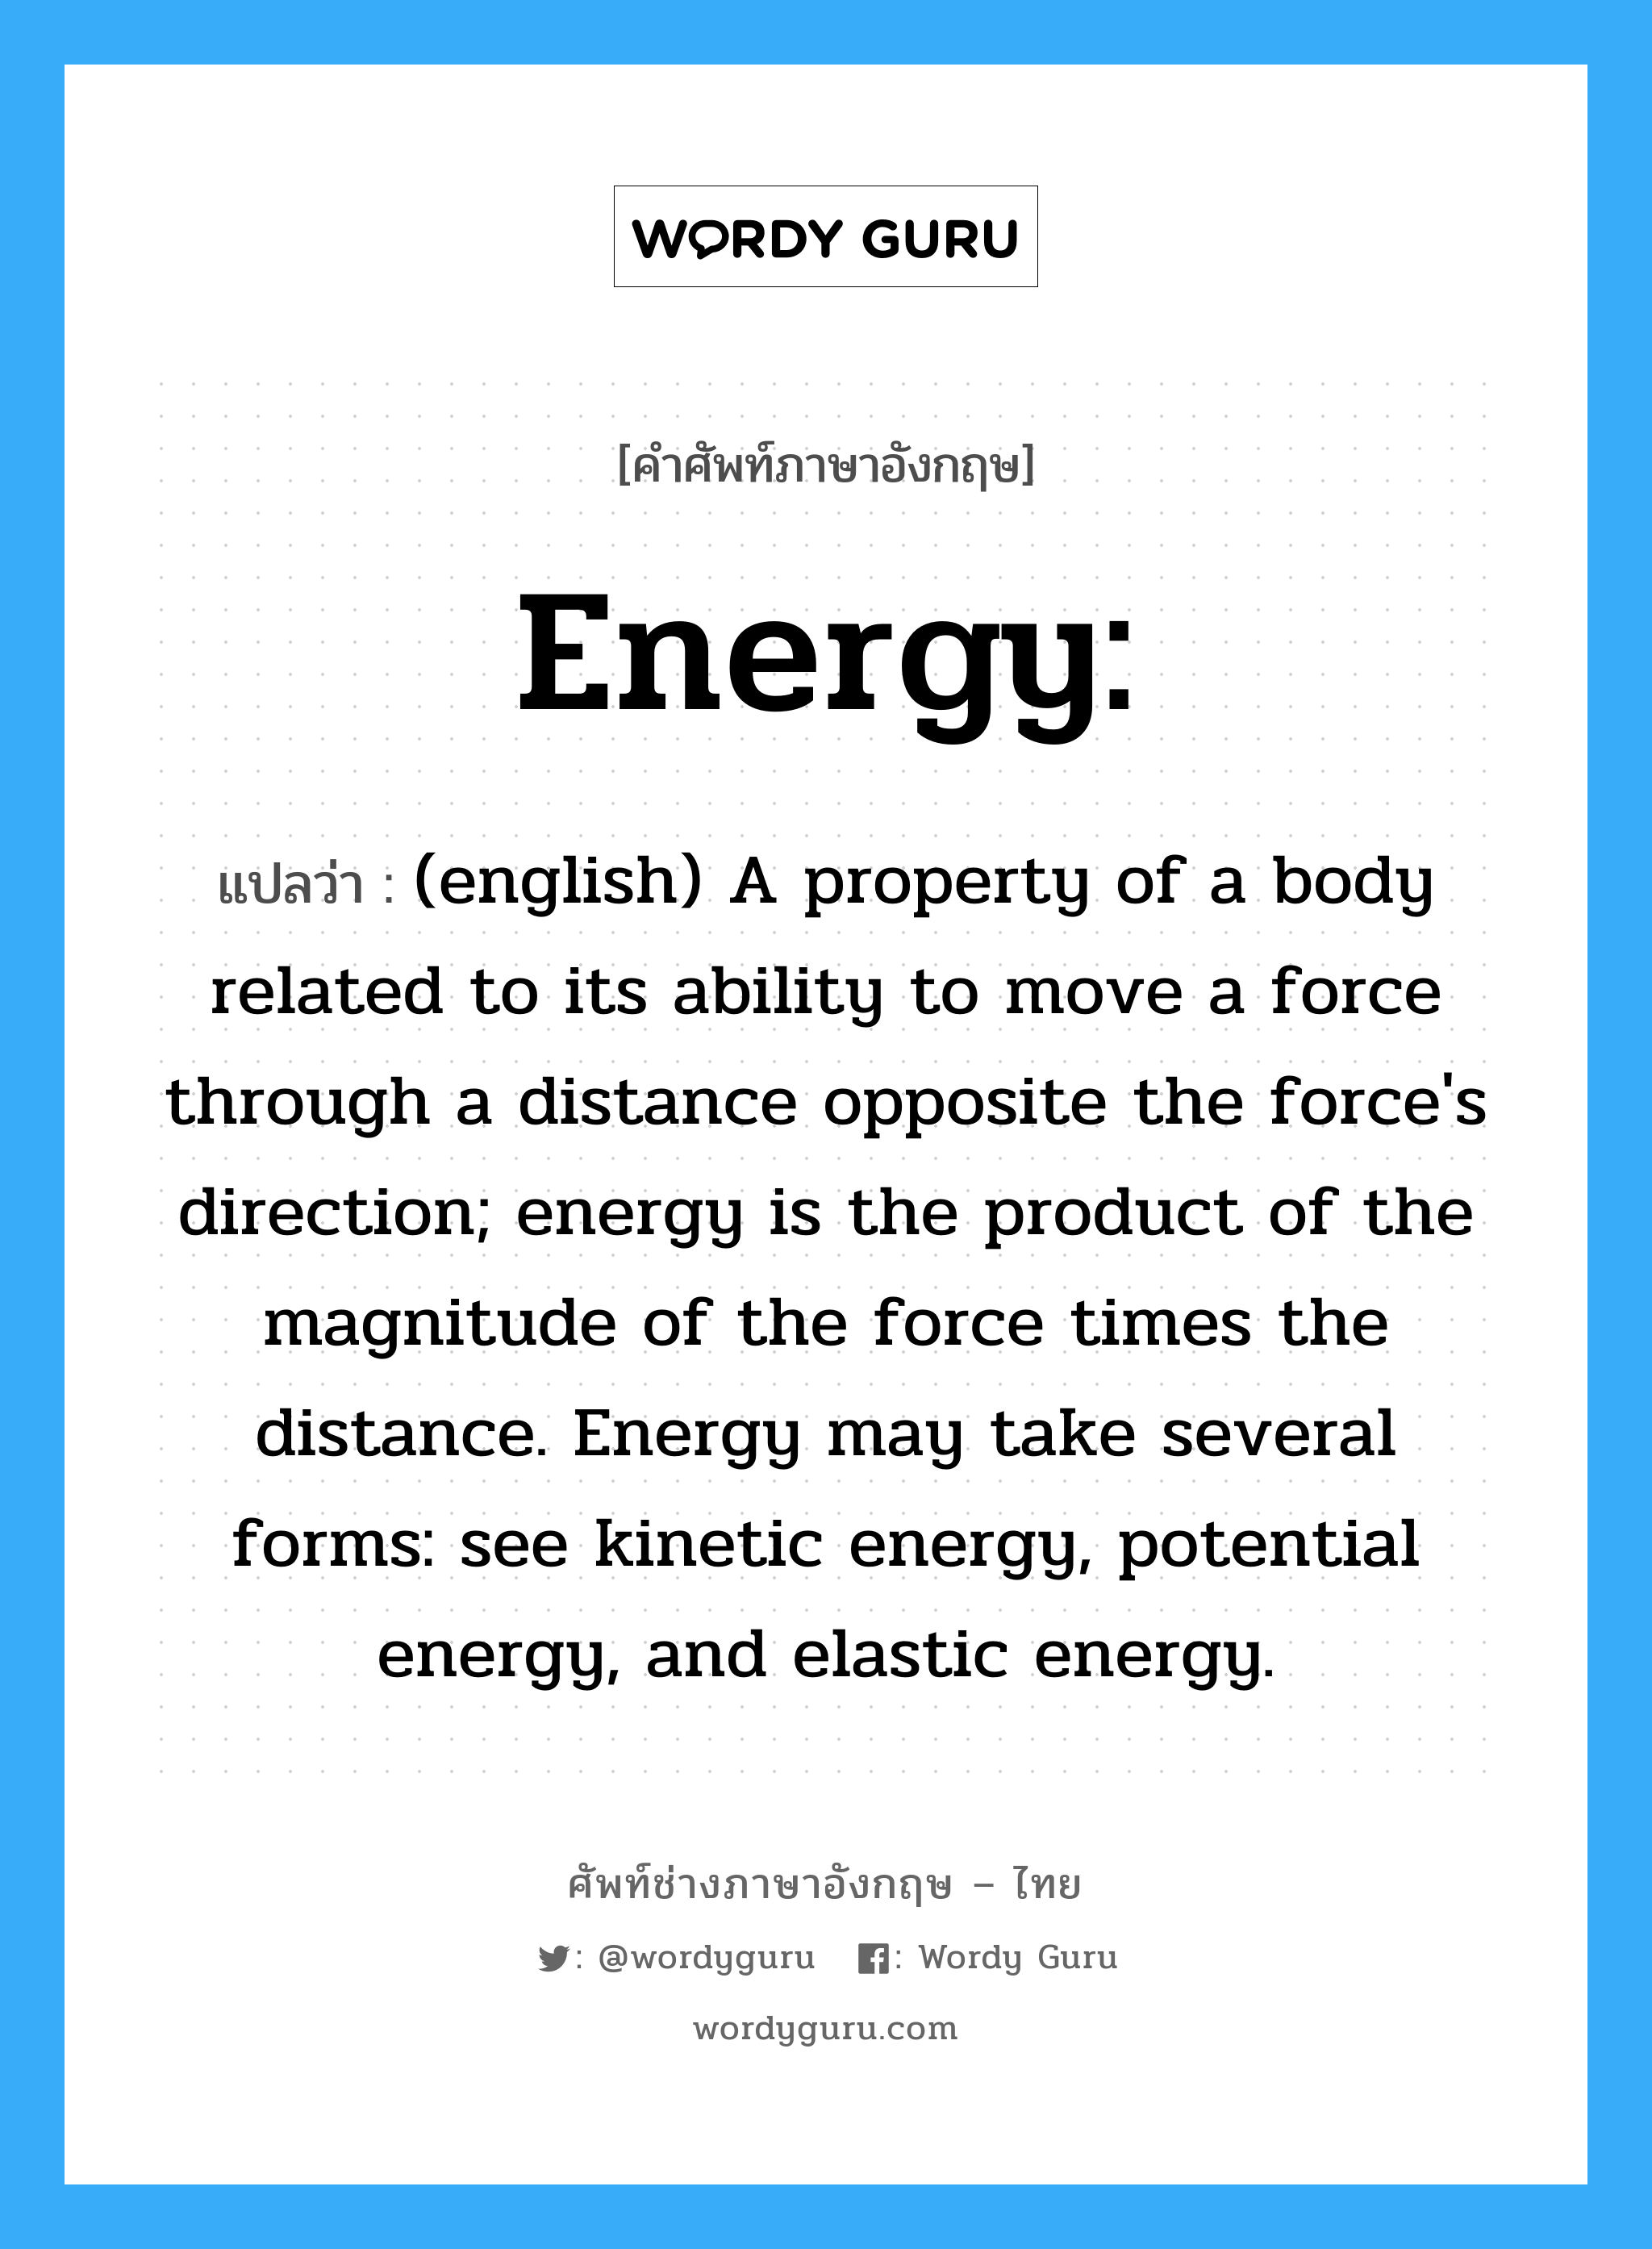 Energy: แปลว่า?, คำศัพท์ช่างภาษาอังกฤษ - ไทย Energy: คำศัพท์ภาษาอังกฤษ Energy: แปลว่า (english) A property of a body related to its ability to move a force through a distance opposite the force's direction; energy is the product of the magnitude of the force times the distance. Energy may take several forms: see kinetic energy, potential energy, and elastic energy.